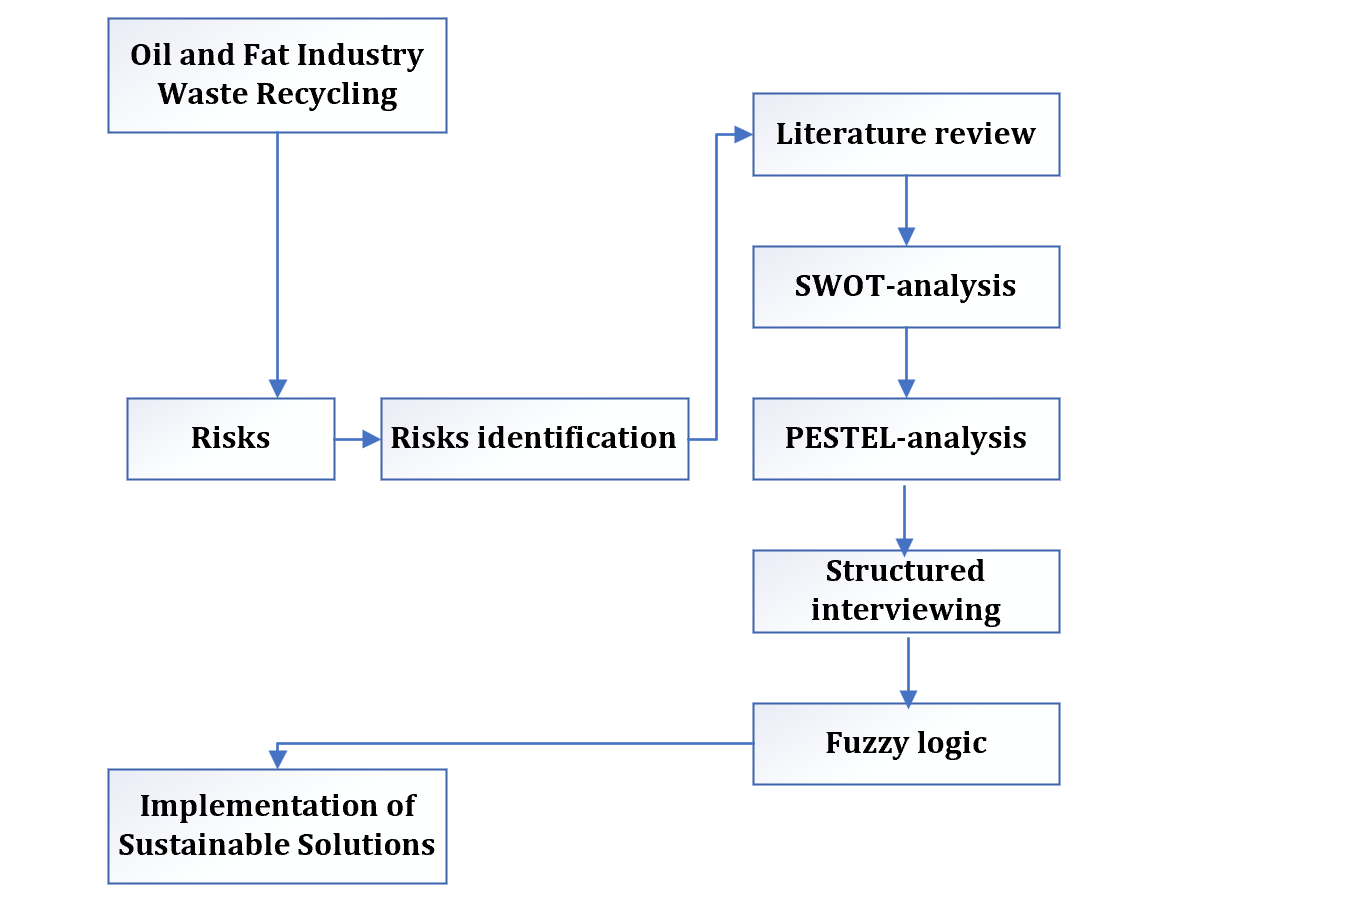 Index terms: Biogas plant; Fuzzy logic; Oil and fat industry; Risk assessment; Waste recycling